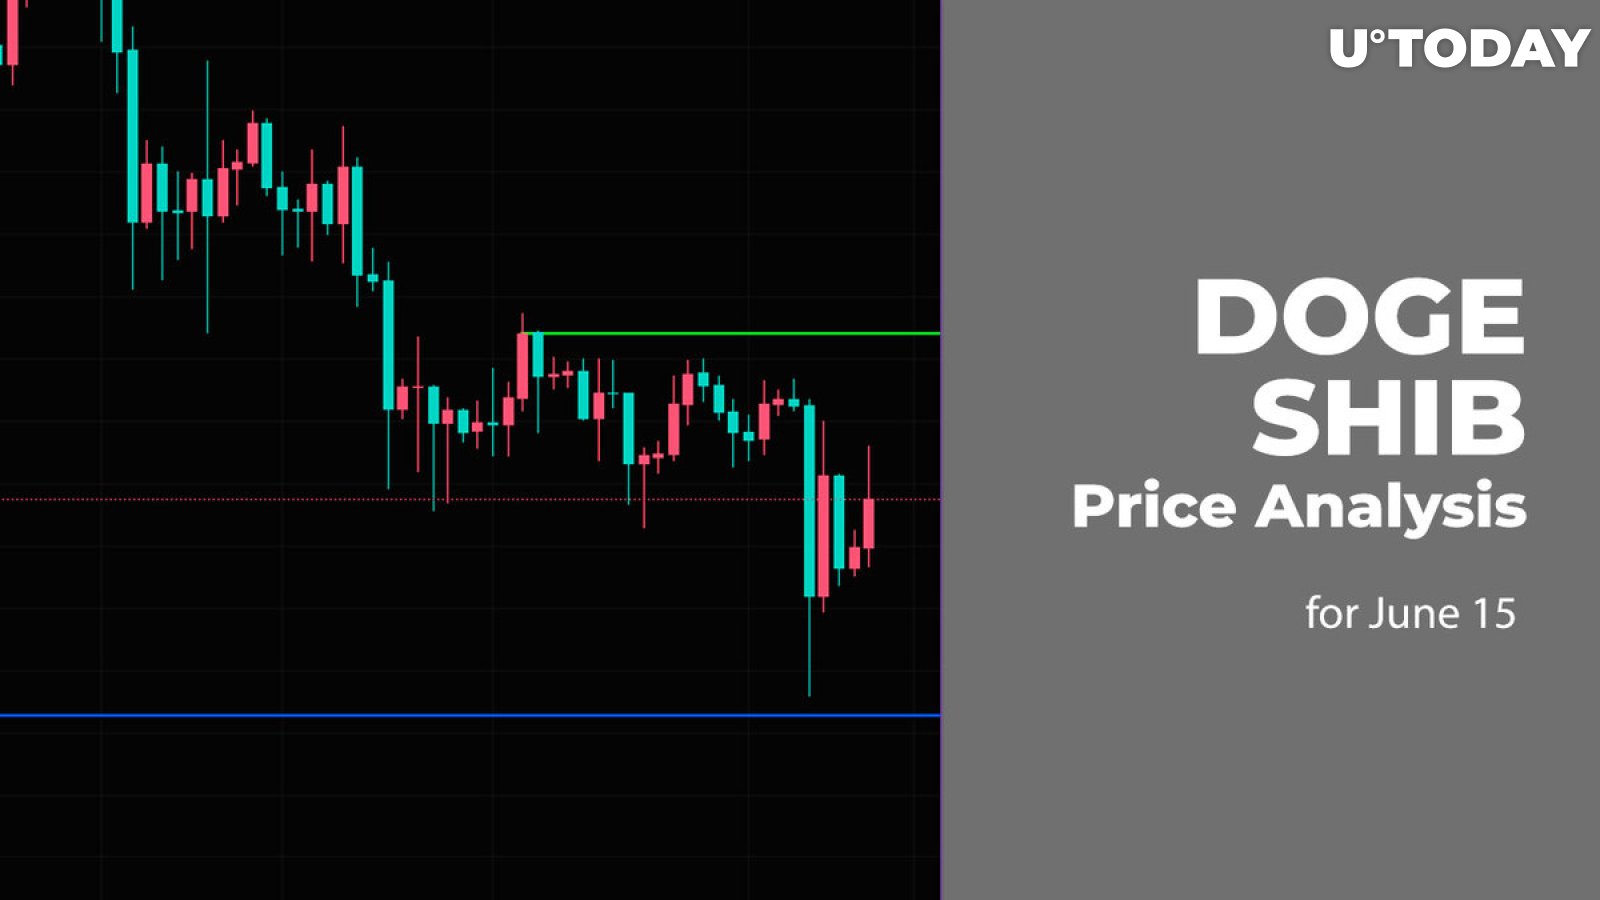 DOGE and SHIB Price Analysis for June 15